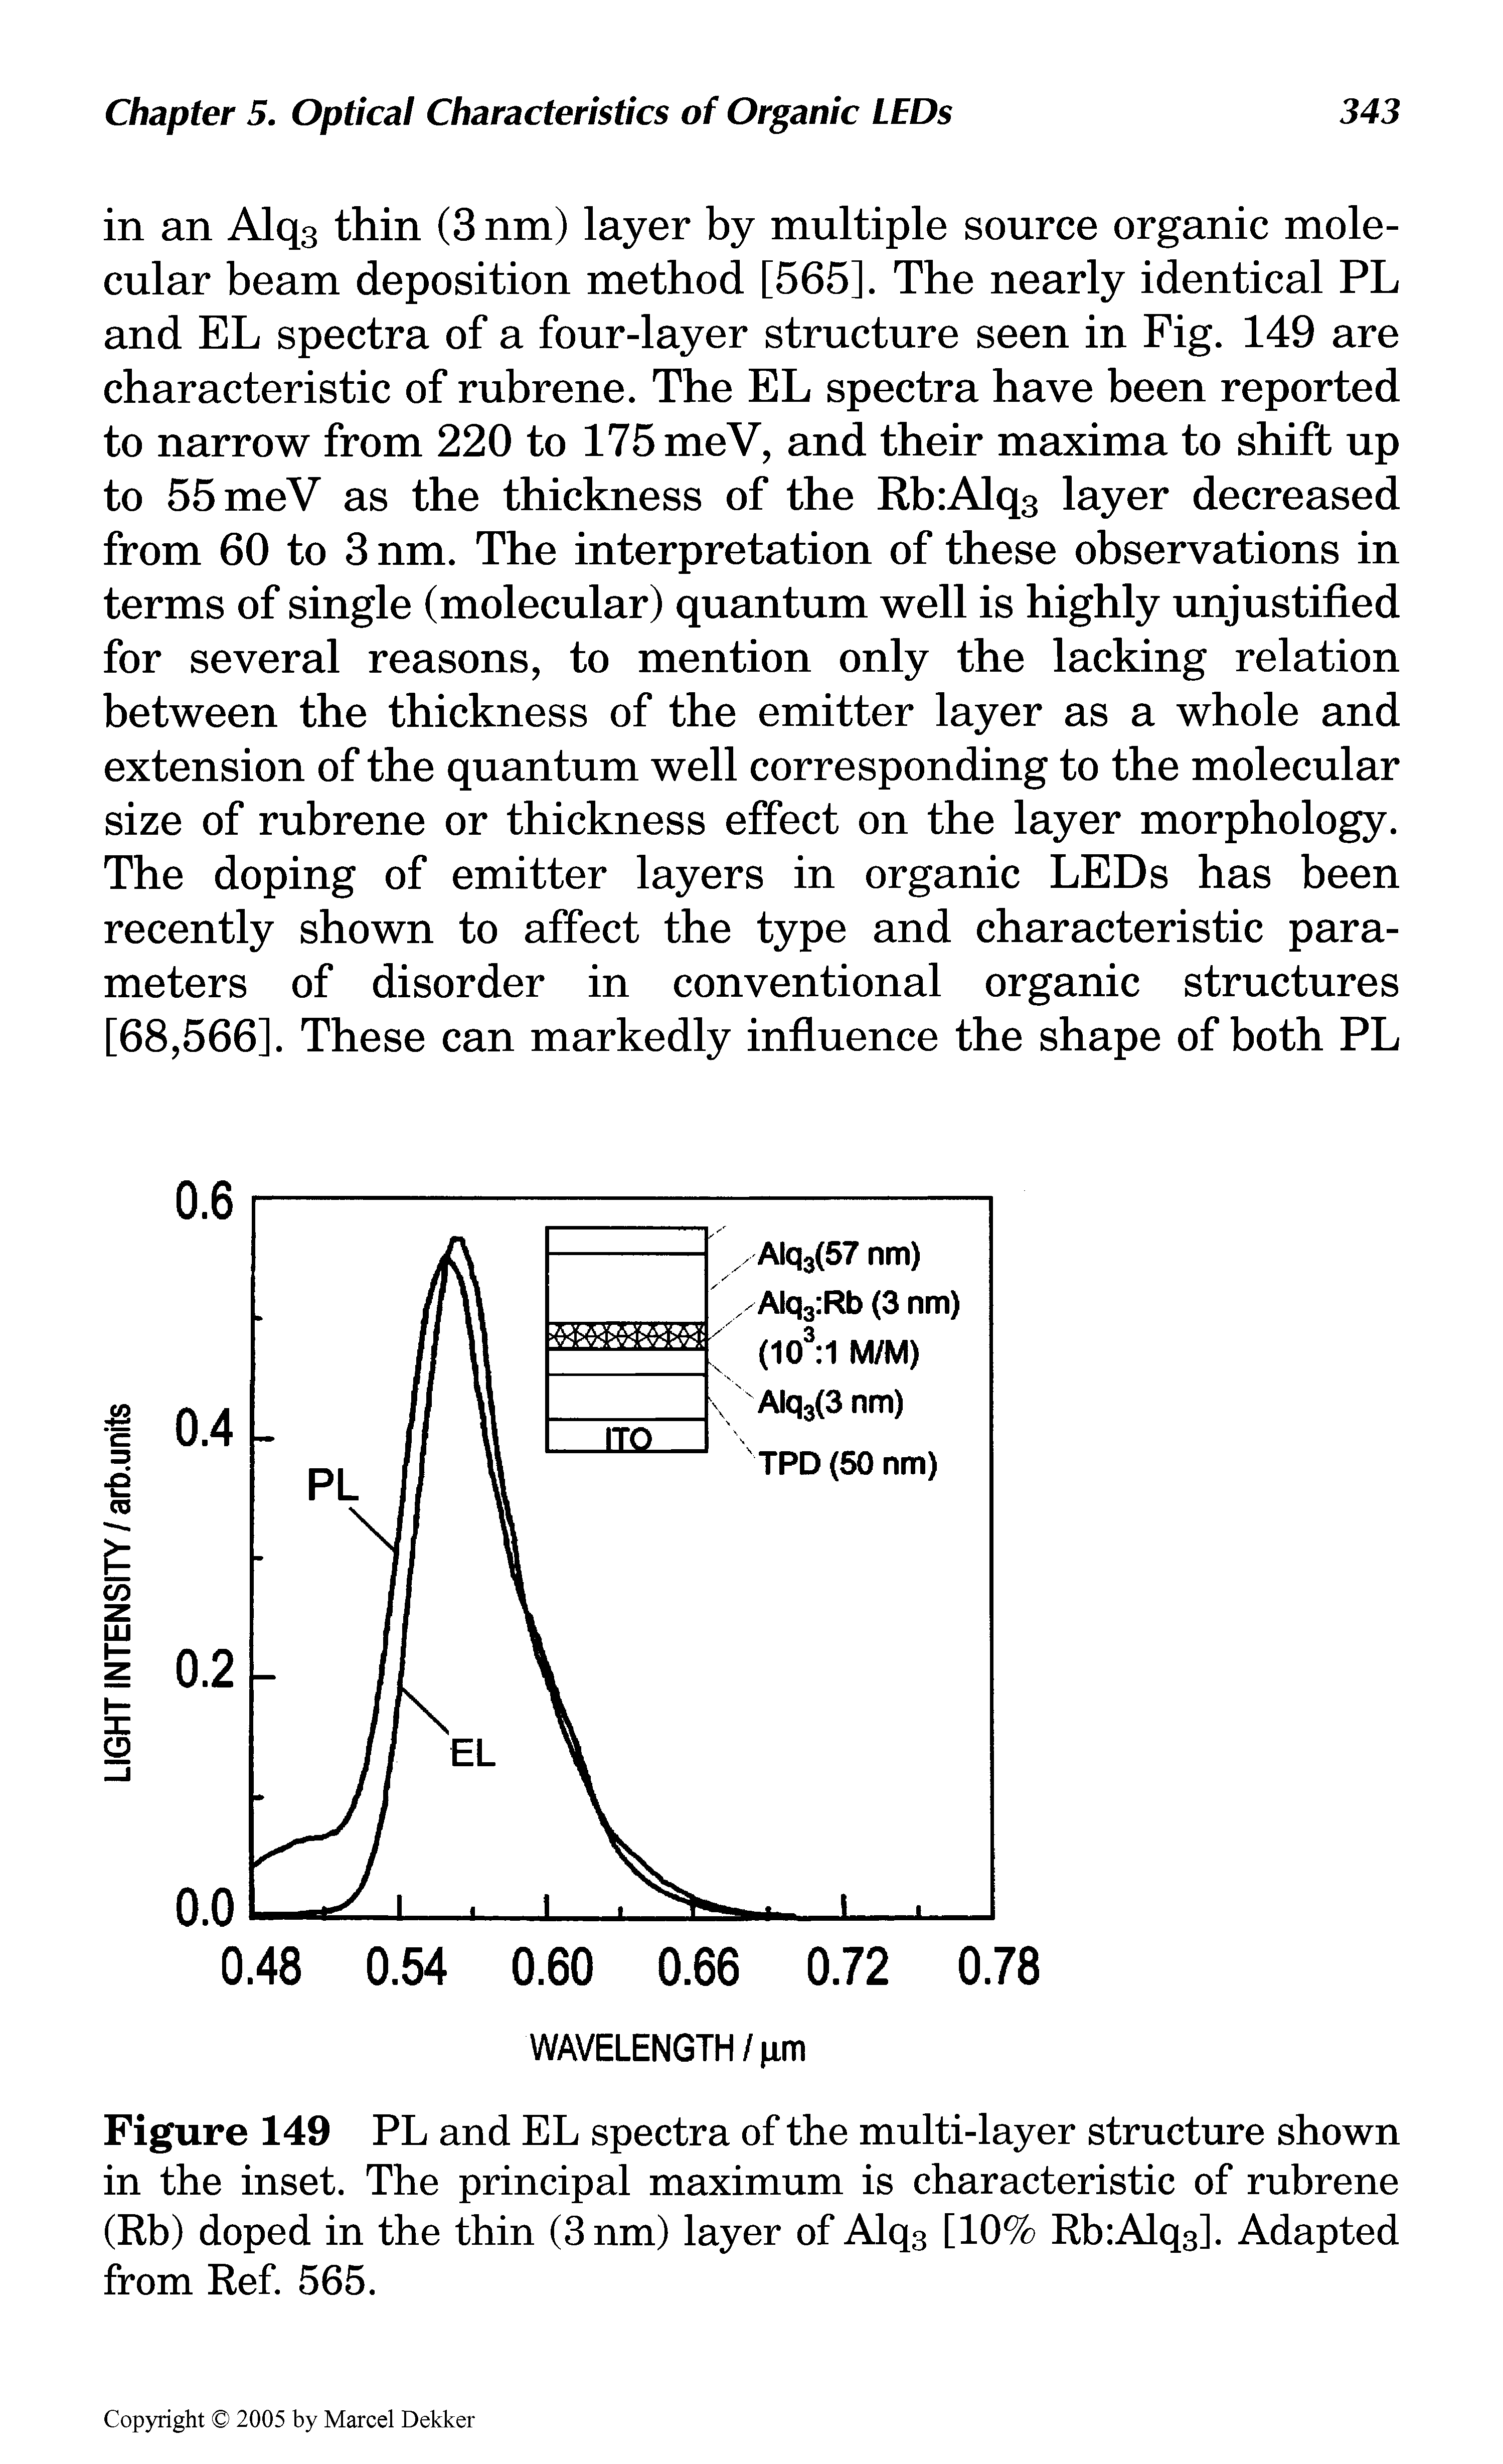 Figure 149 PL and EL spectra of the multi-layer structure shown in the inset. The principal maximum is characteristic of rubrene (Rb) doped in the thin (3nm) layer of Alq3 [10% Rb Alq3], Adapted from Ref. 565.